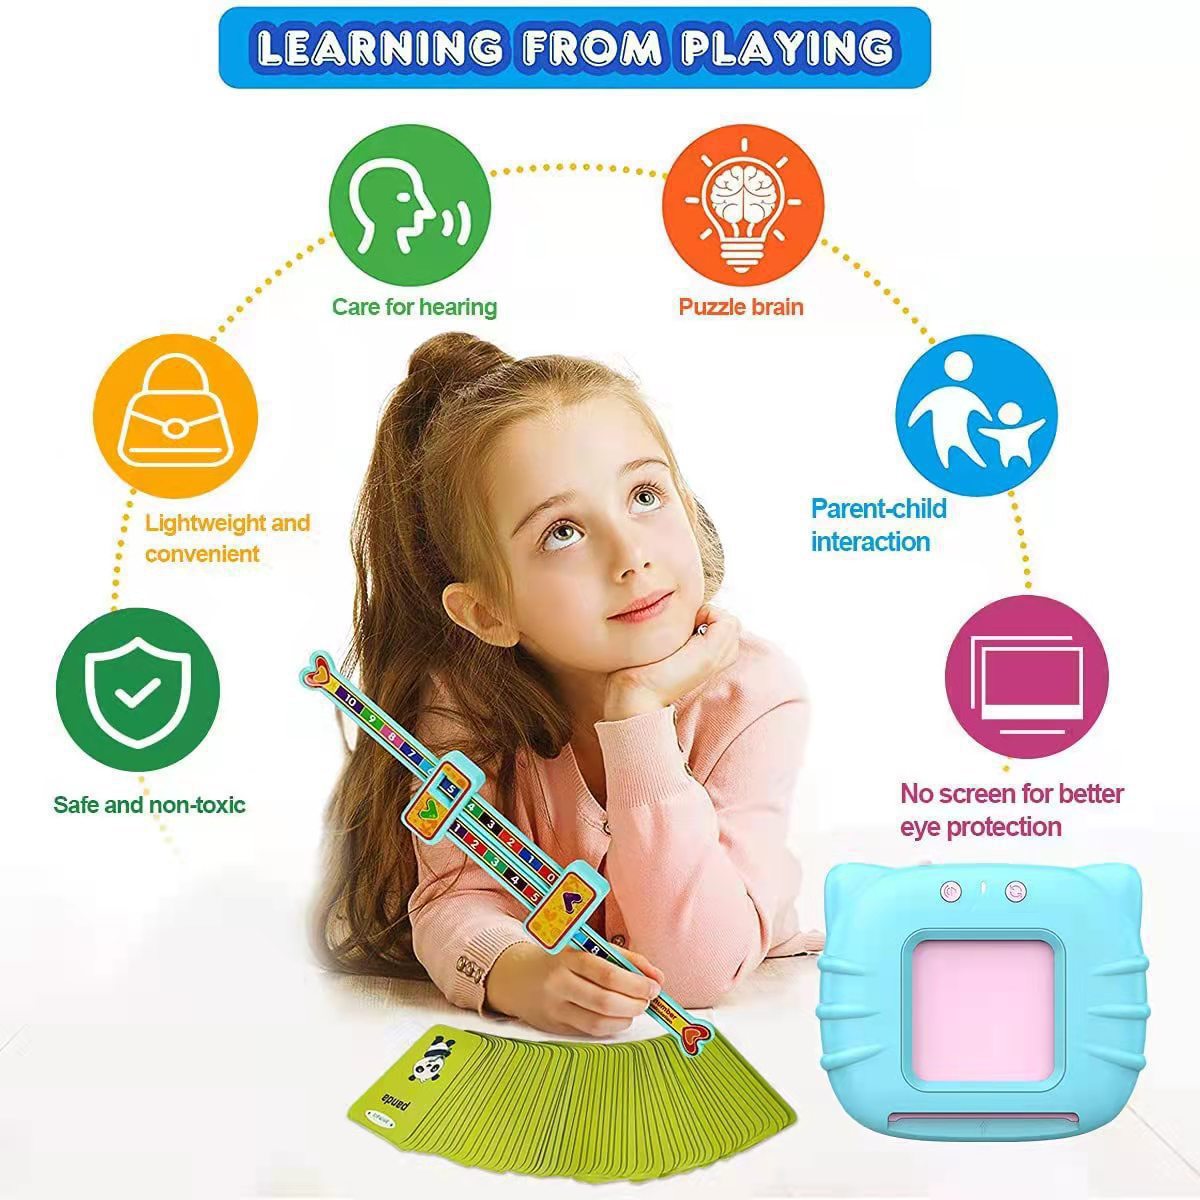 KID Learning Pocket Vocab SALE(Free Shipping)